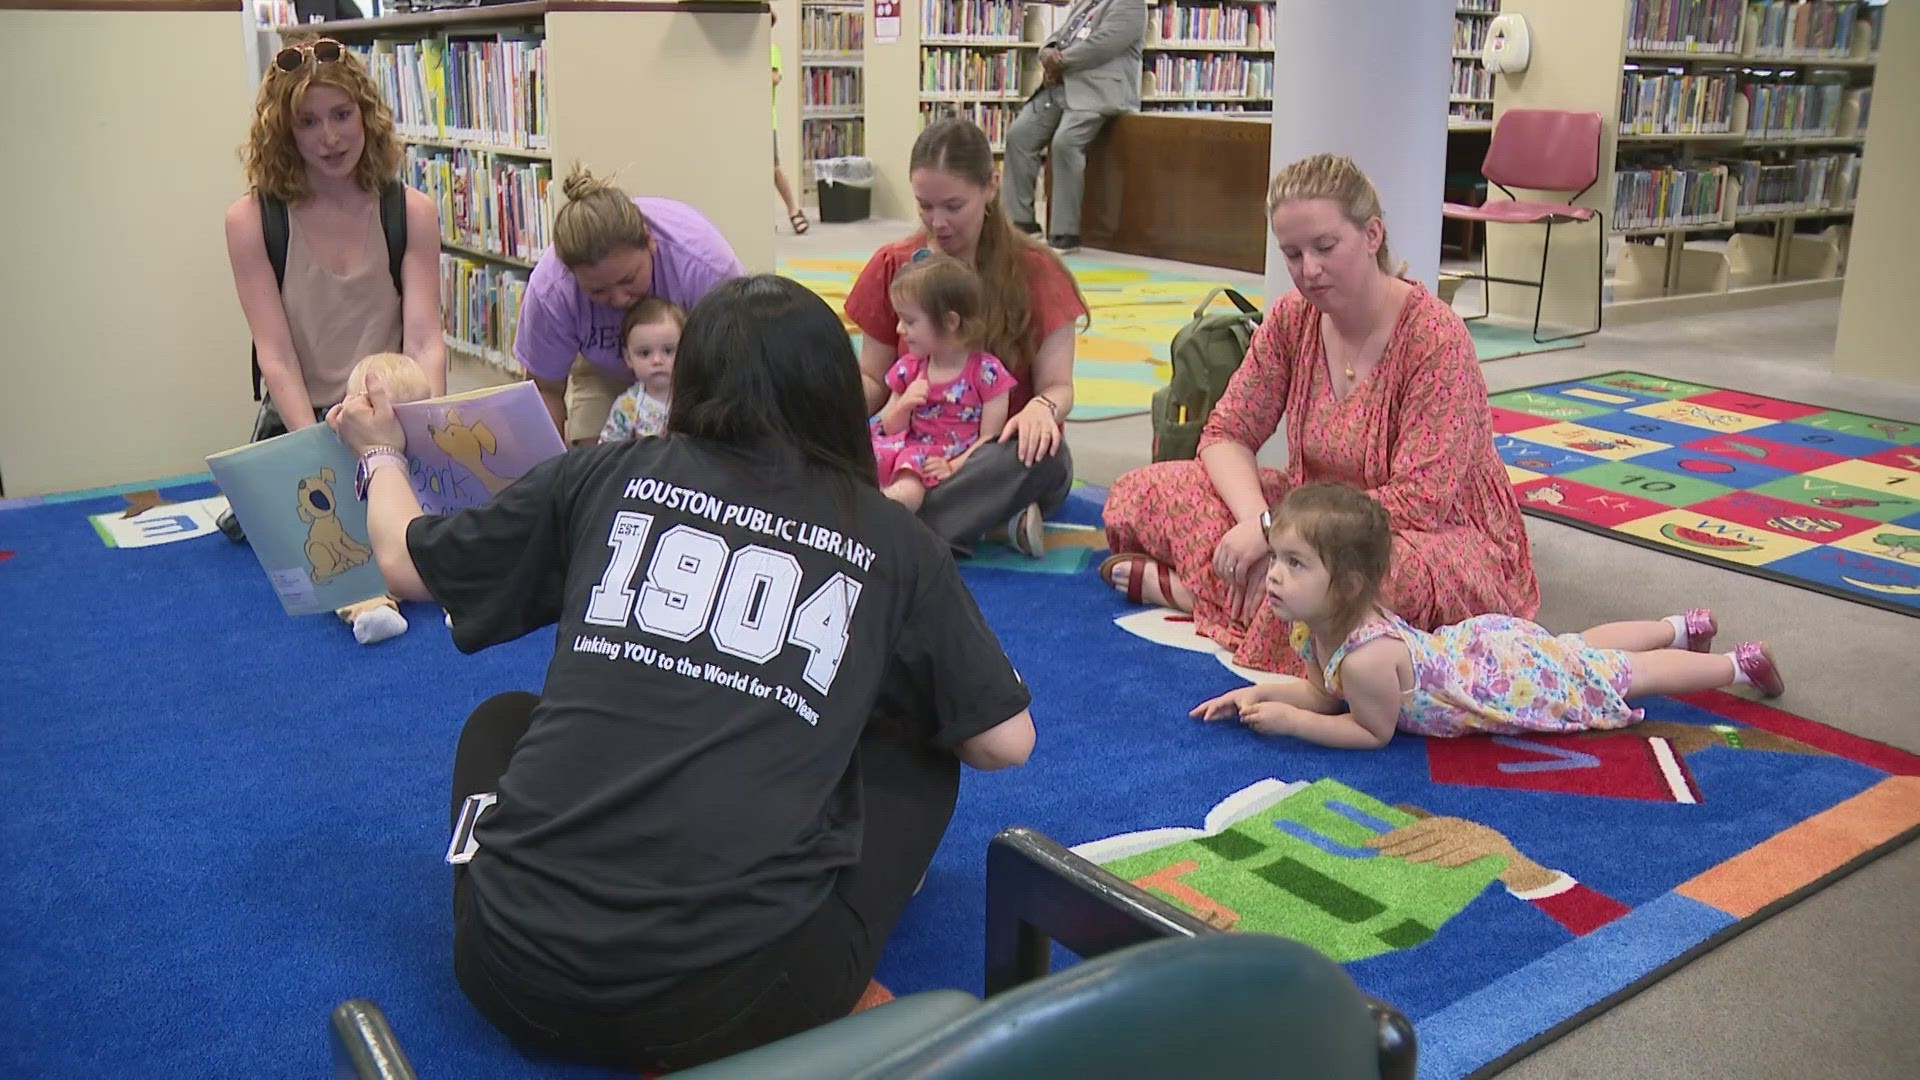 After Houston Public Library officials announced last month that the library was closing for good because of safety concerns, Mayor Whitmire intervened to save it.